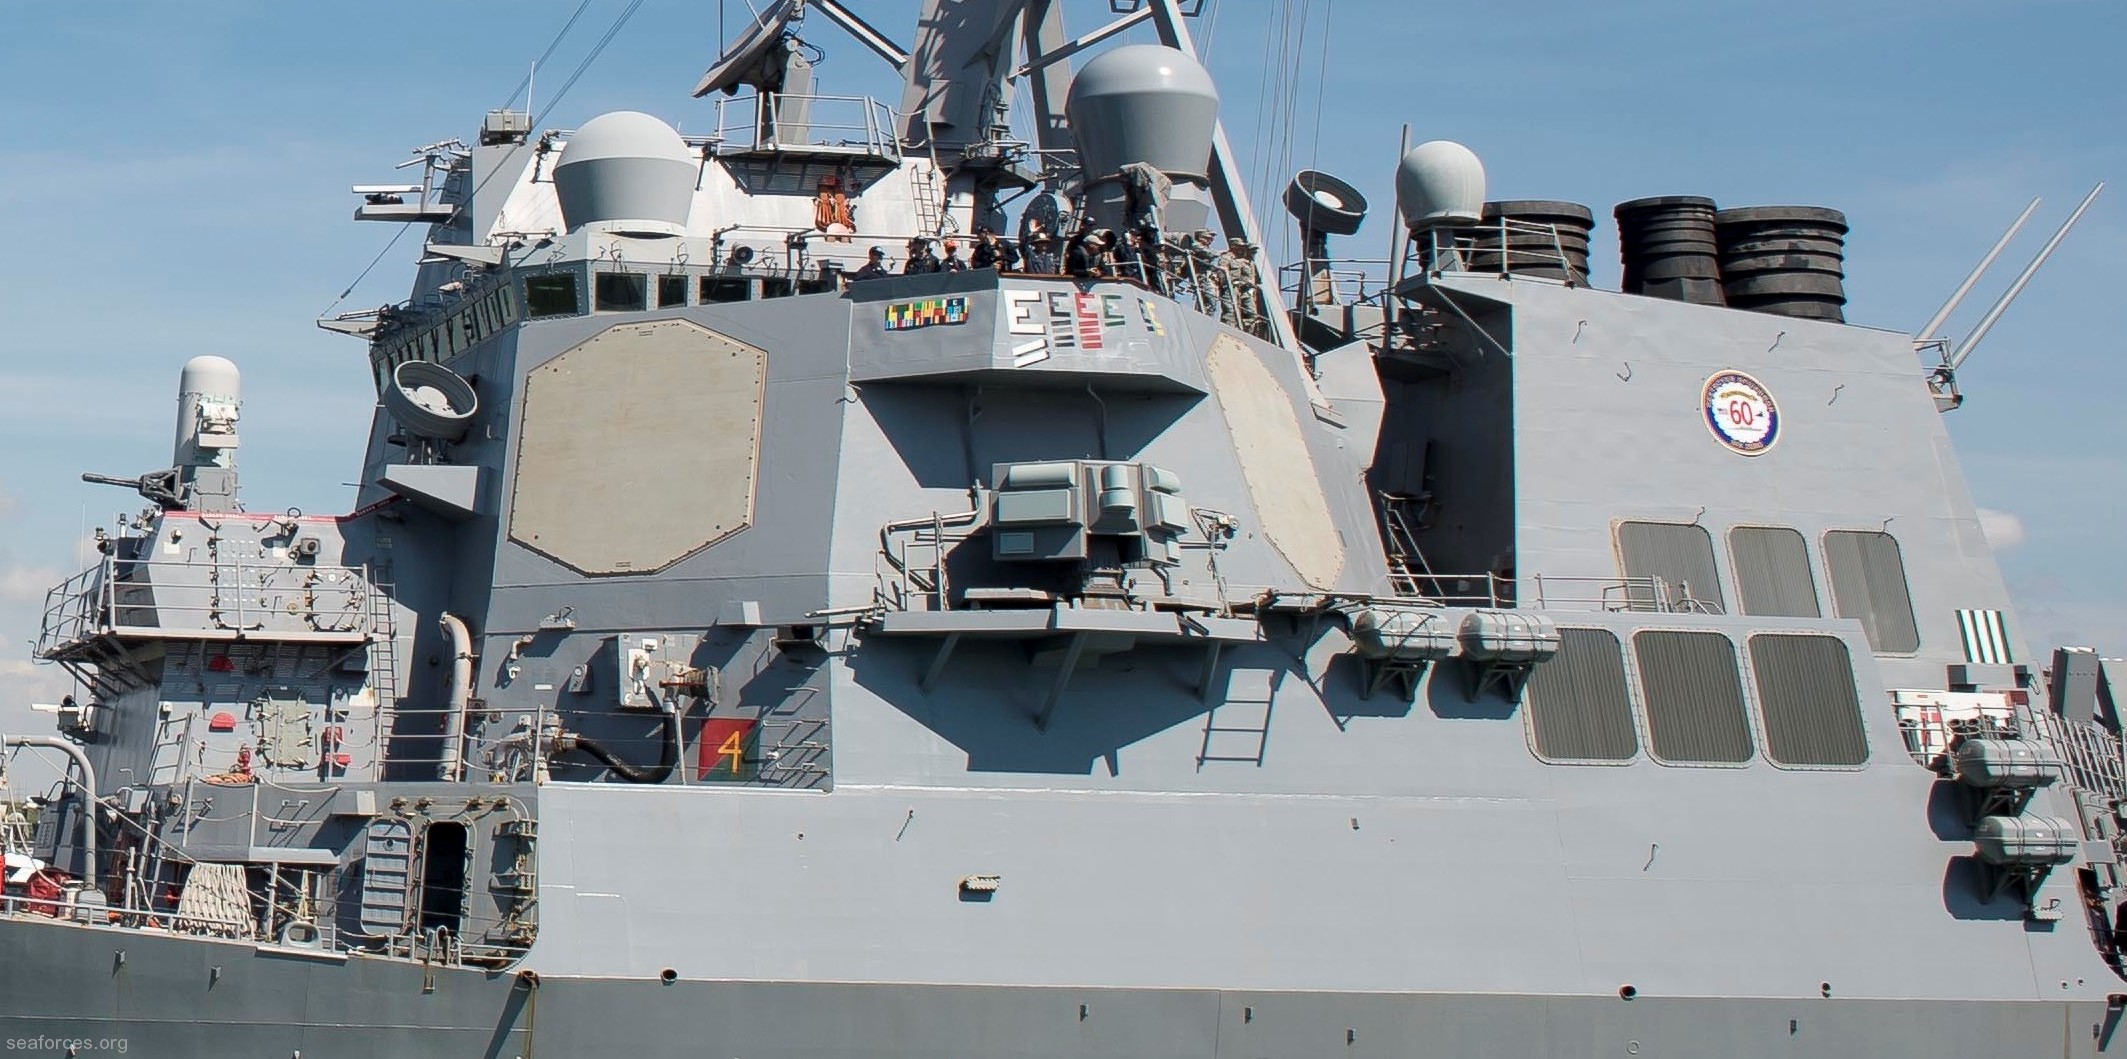 arleigh burke class guided missile destroyer us navy 17 superstructure details